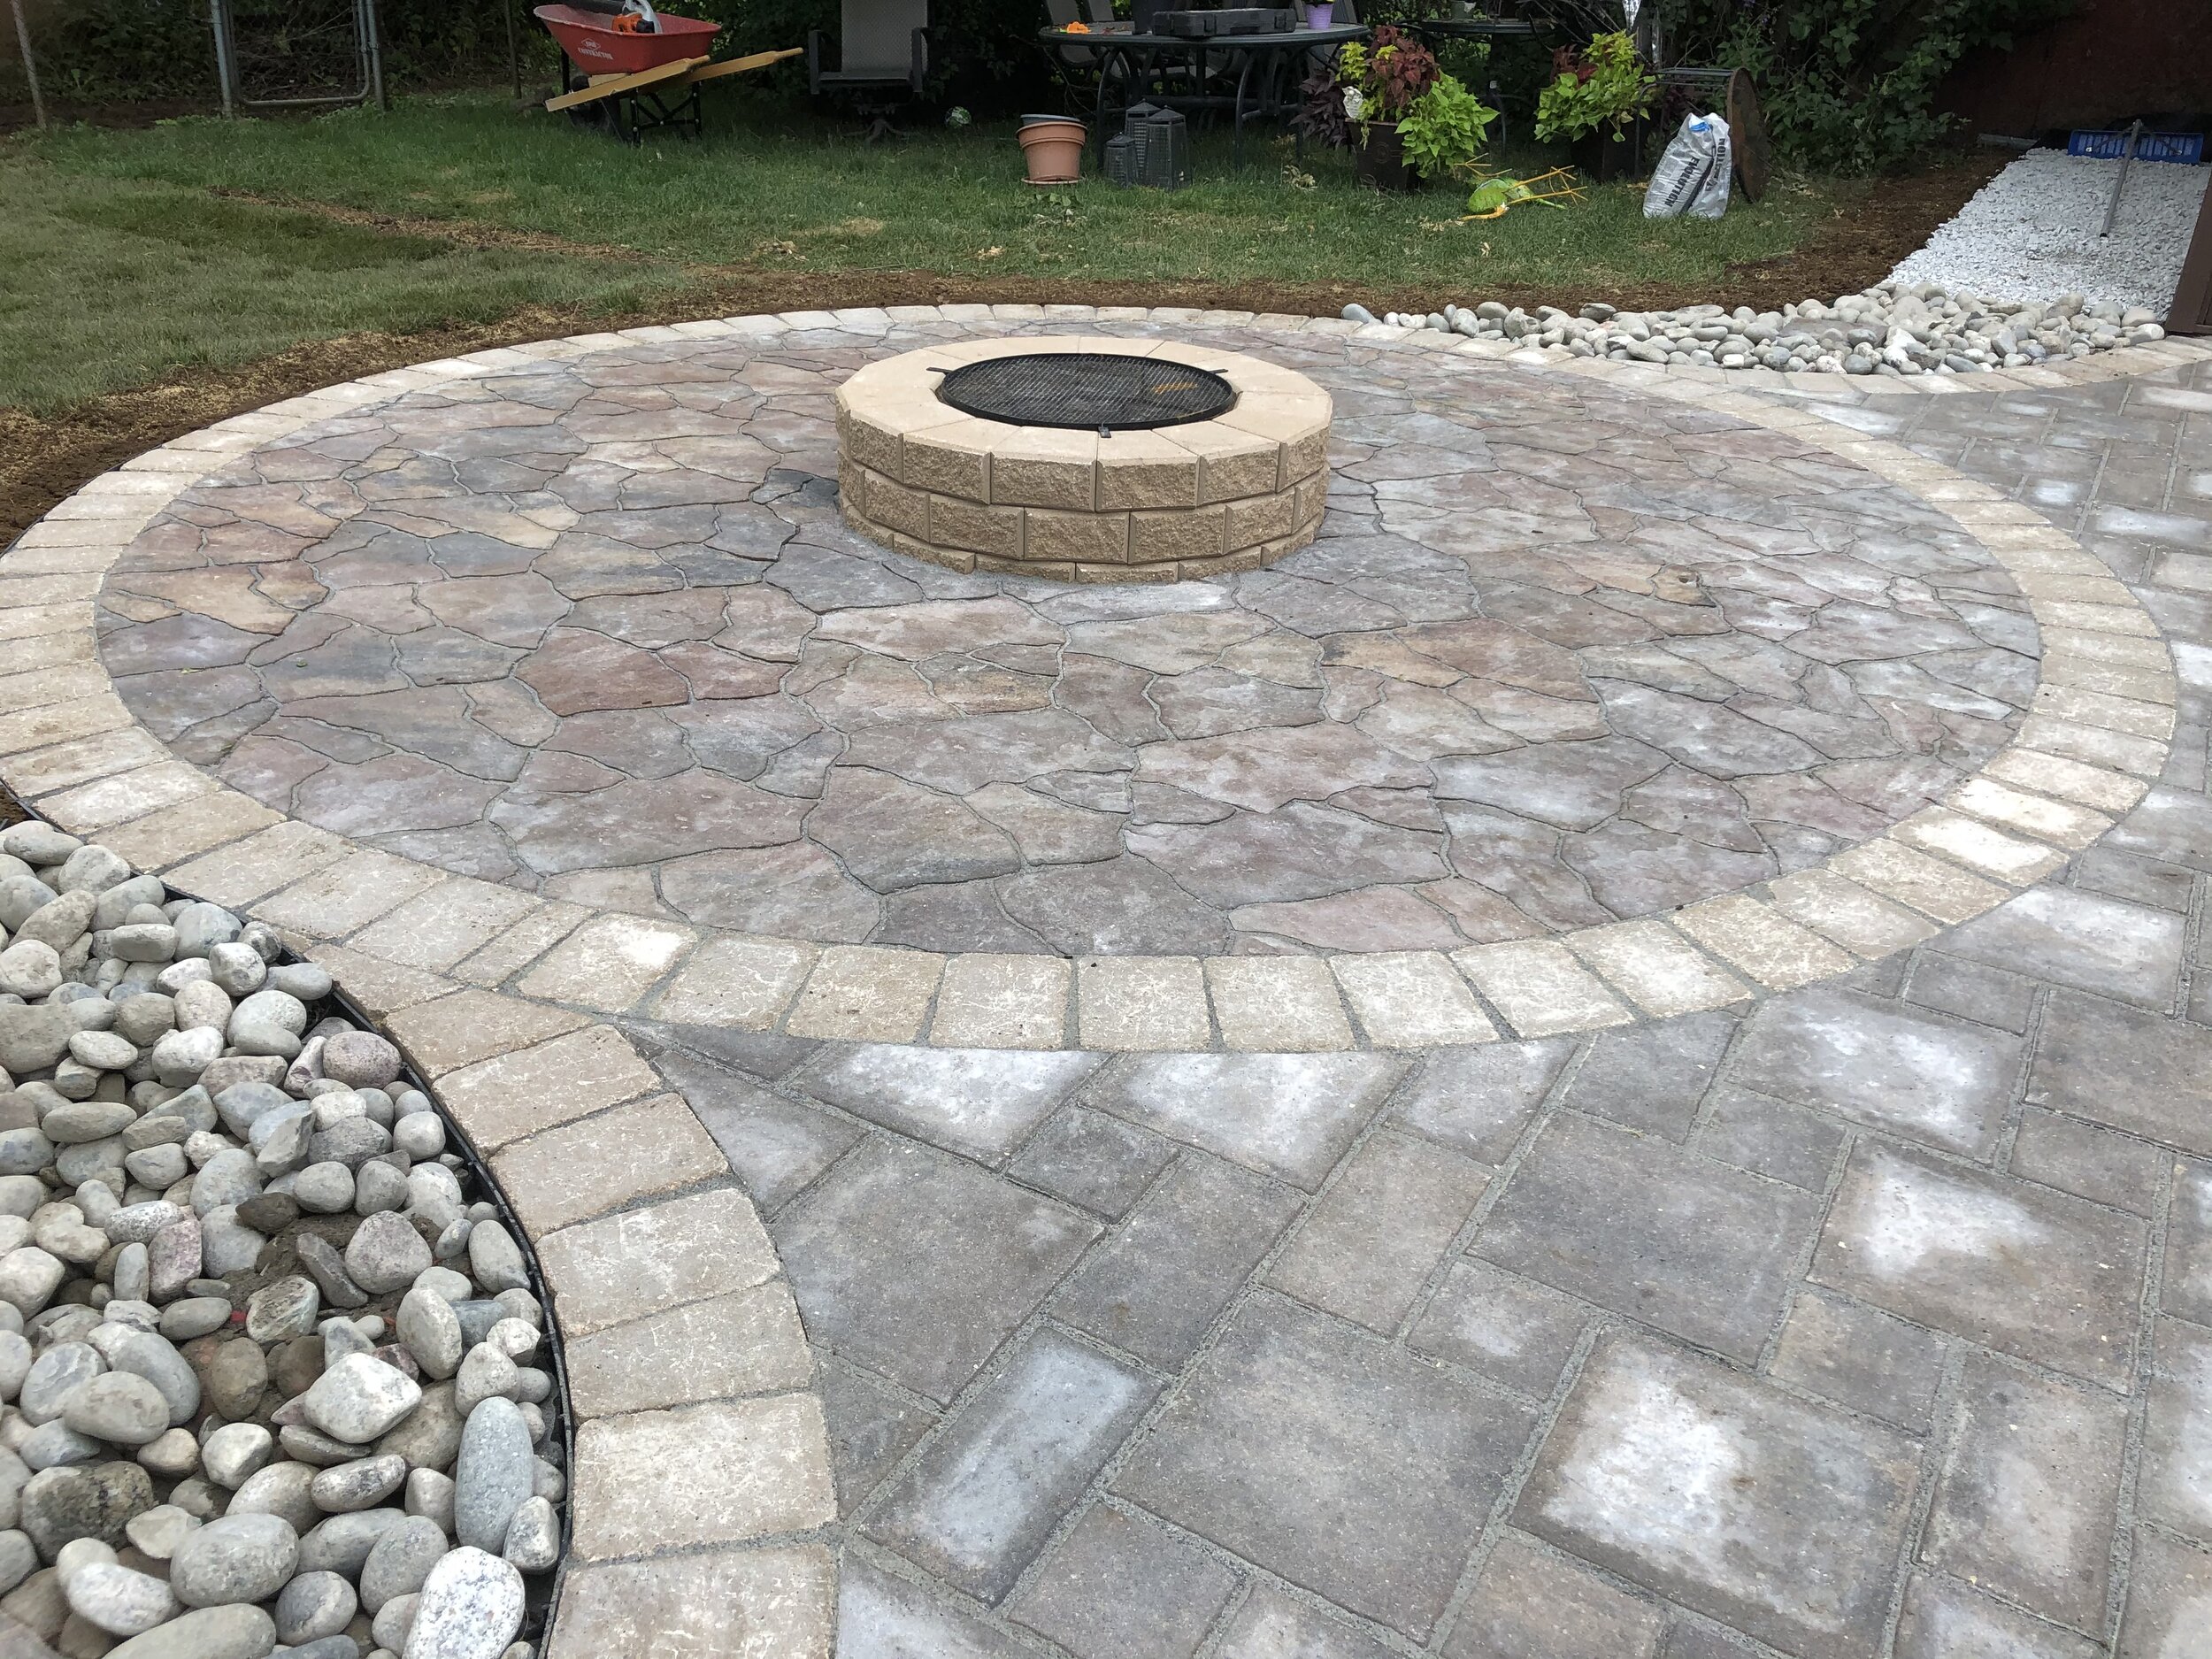 Flagstone circle patio with a fire pit